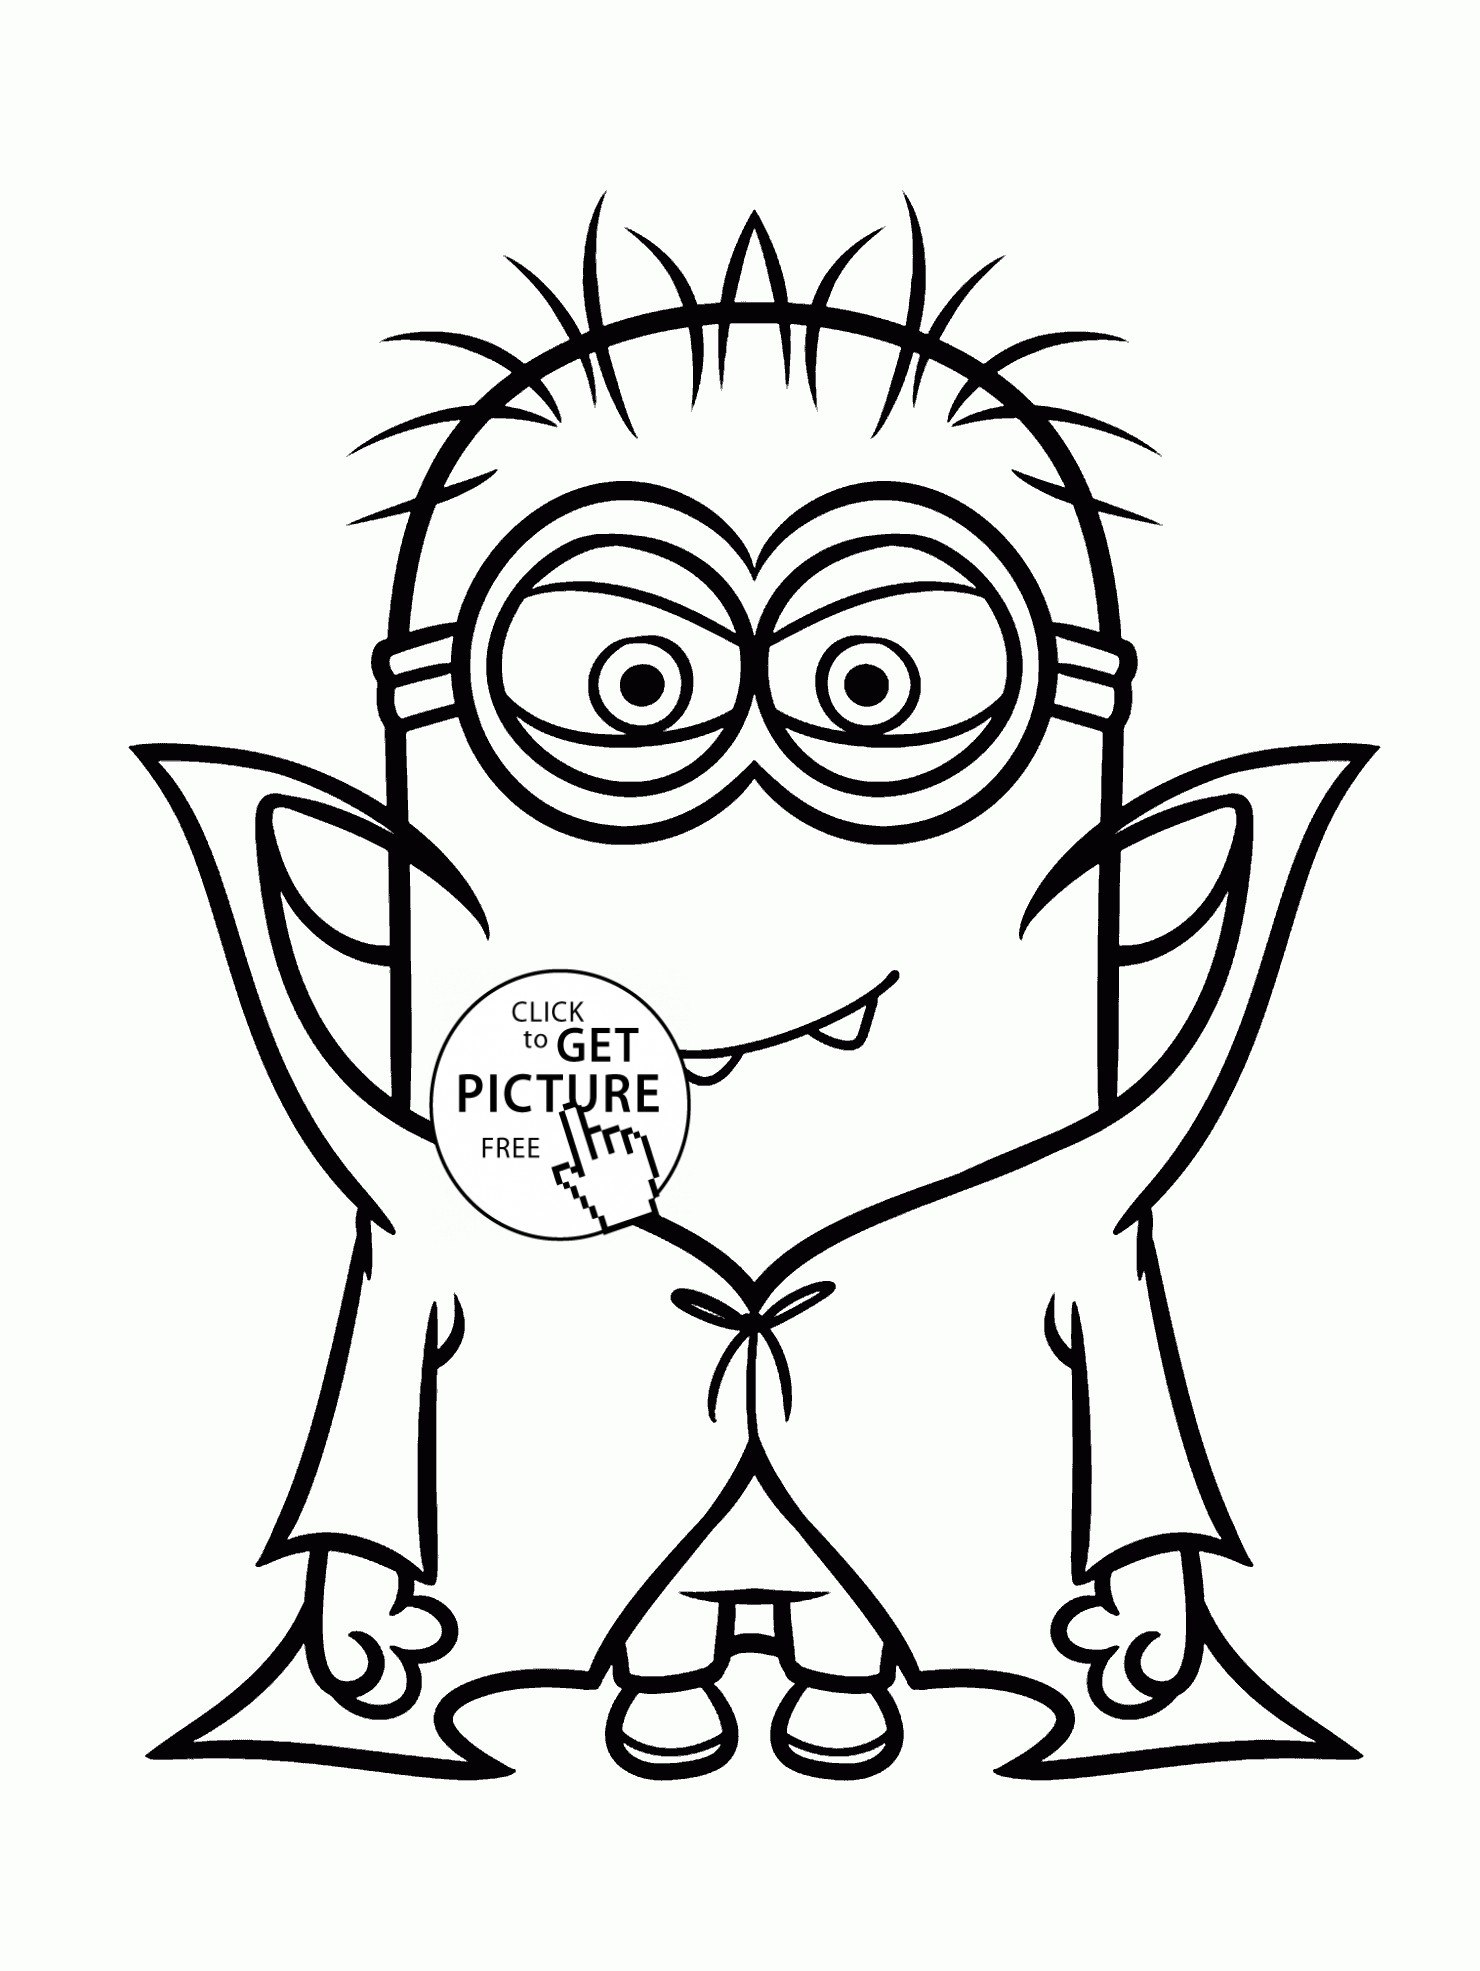 Scary Halloween Coloring Pages at Free printable